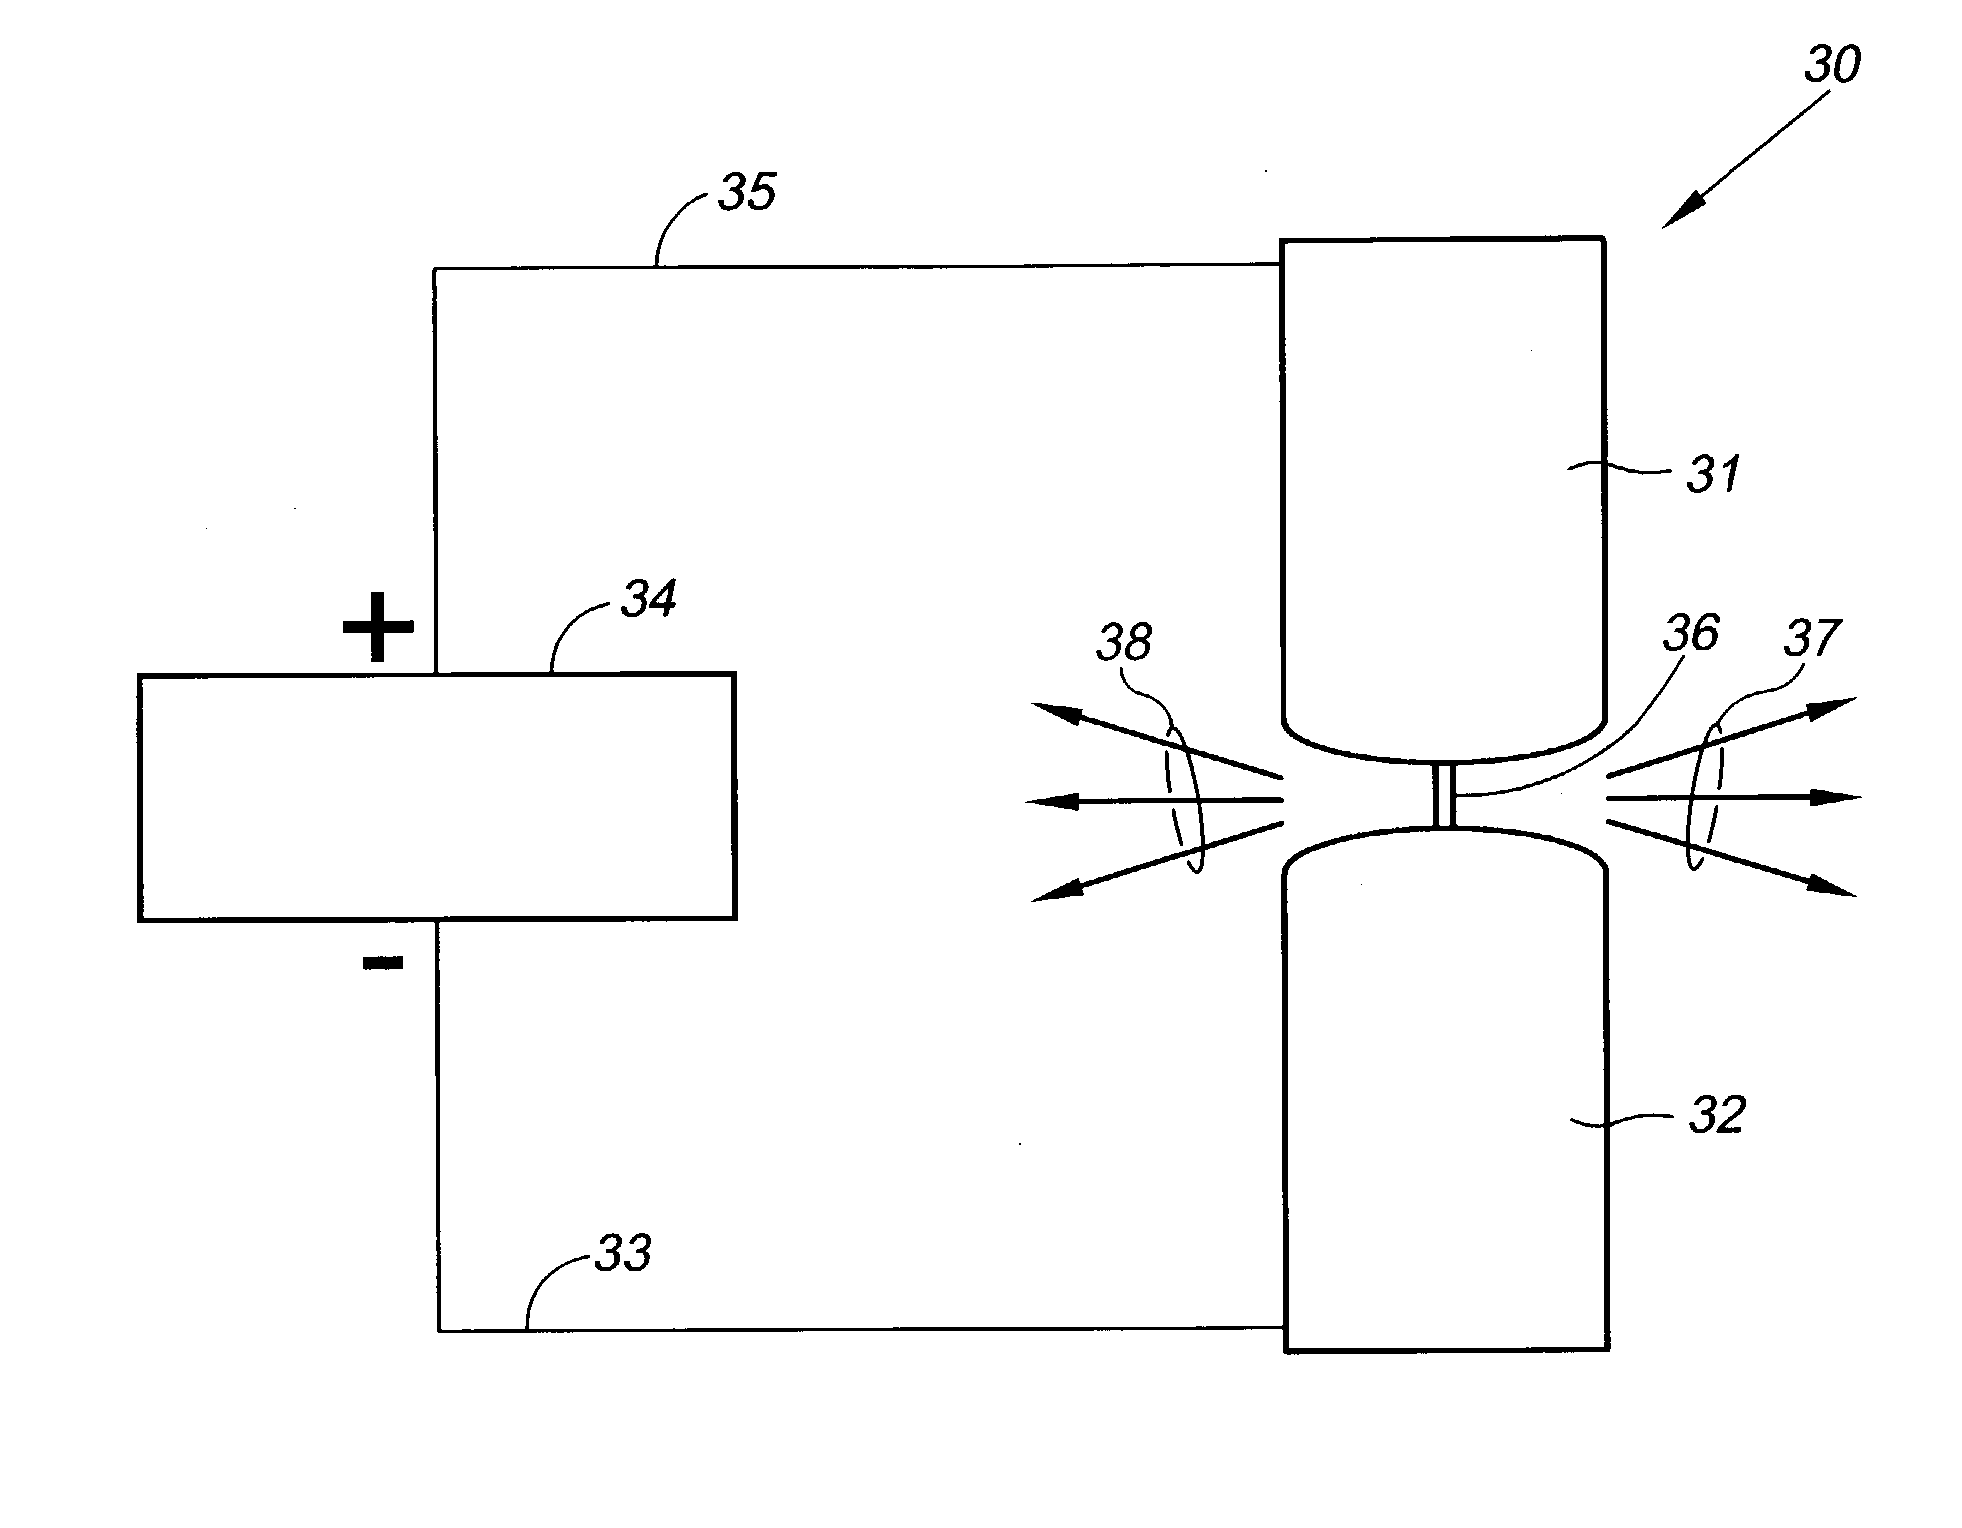 Radial pulsed arc discharge gun for synthesizing nanopowders